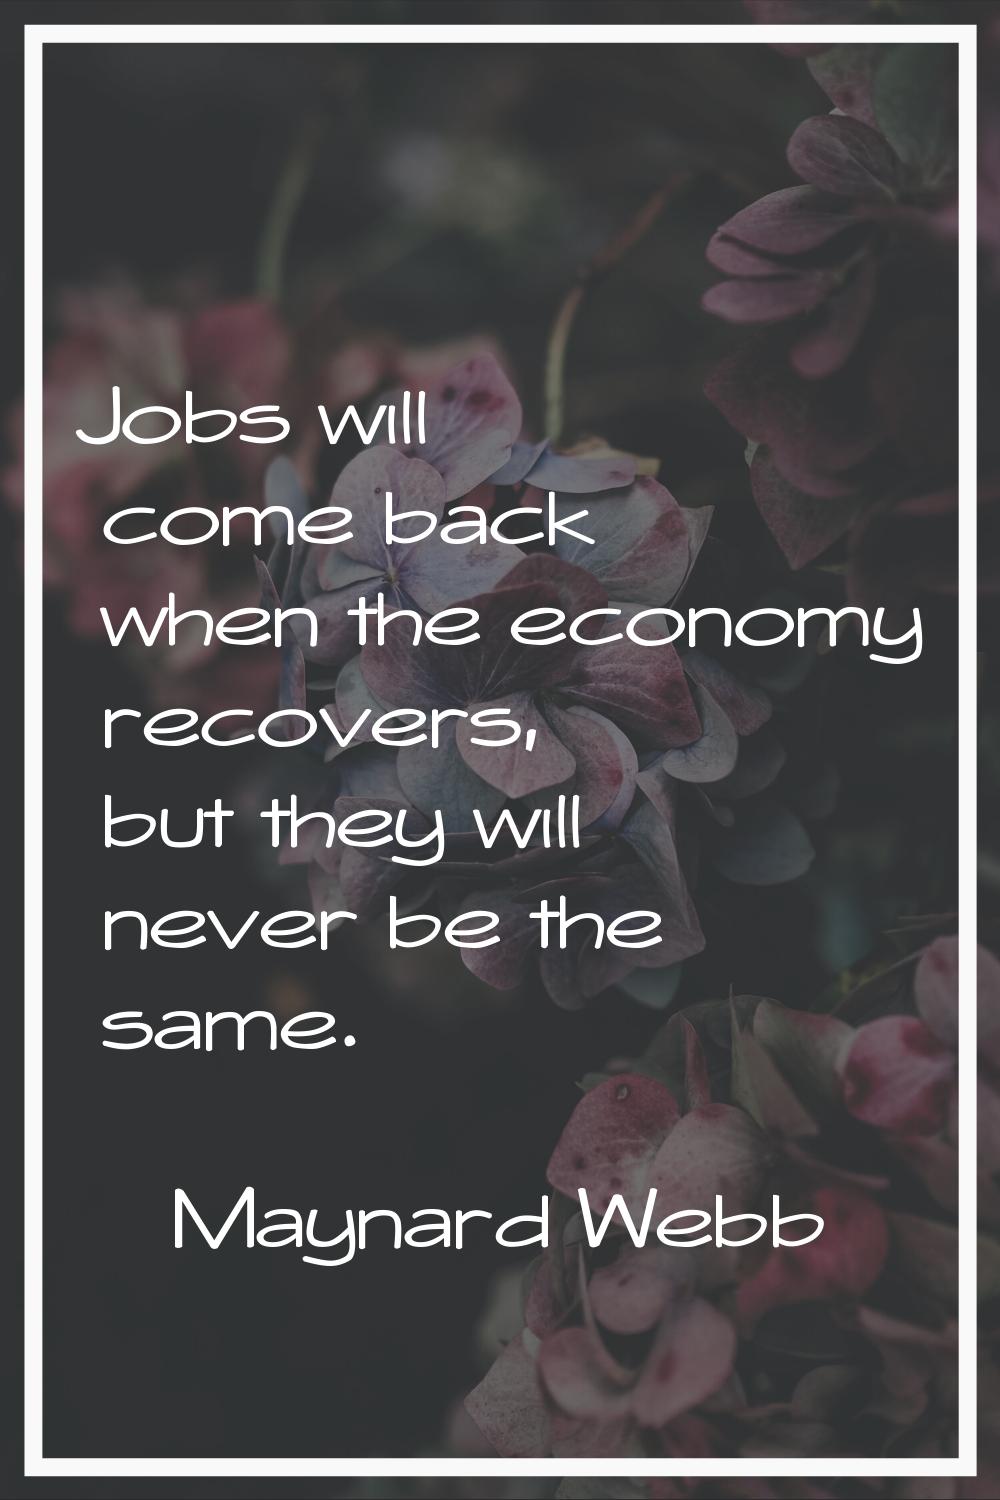 Jobs will come back when the economy recovers, but they will never be the same.